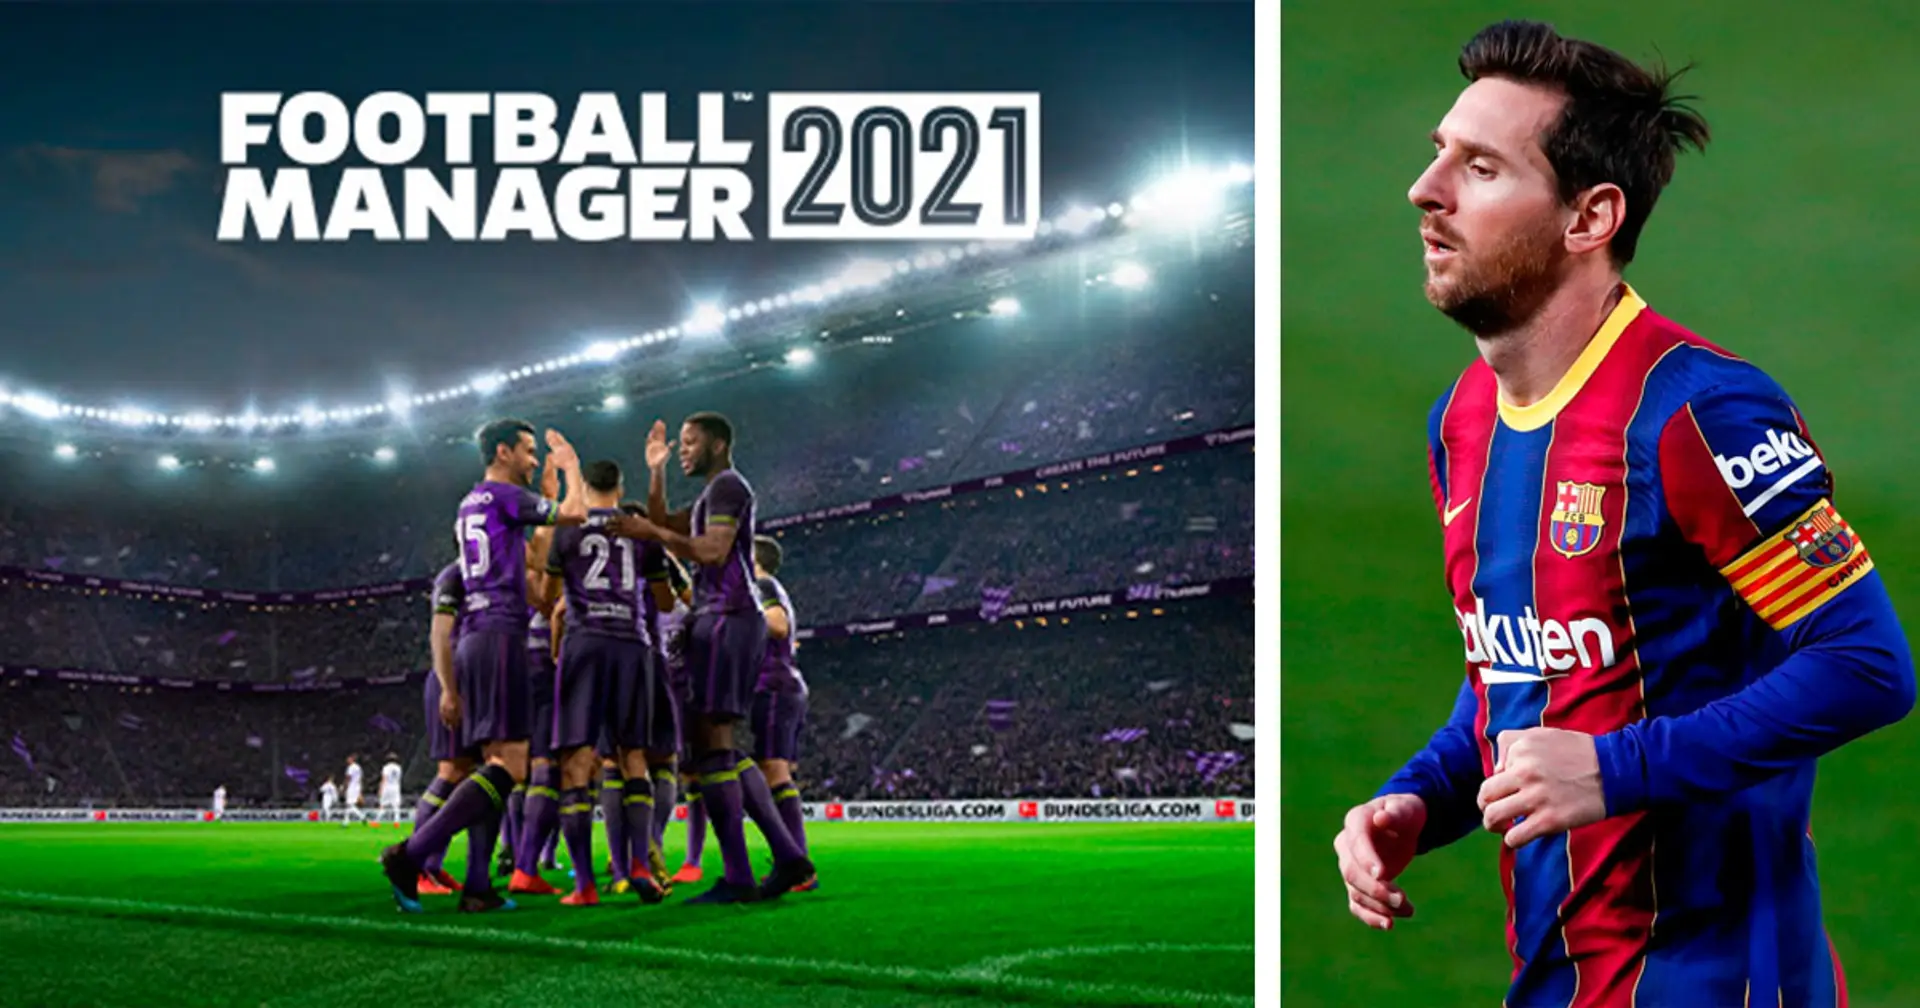 I decided NOT to extend Messi's contract on Football Manager 2021 — and here's what happened